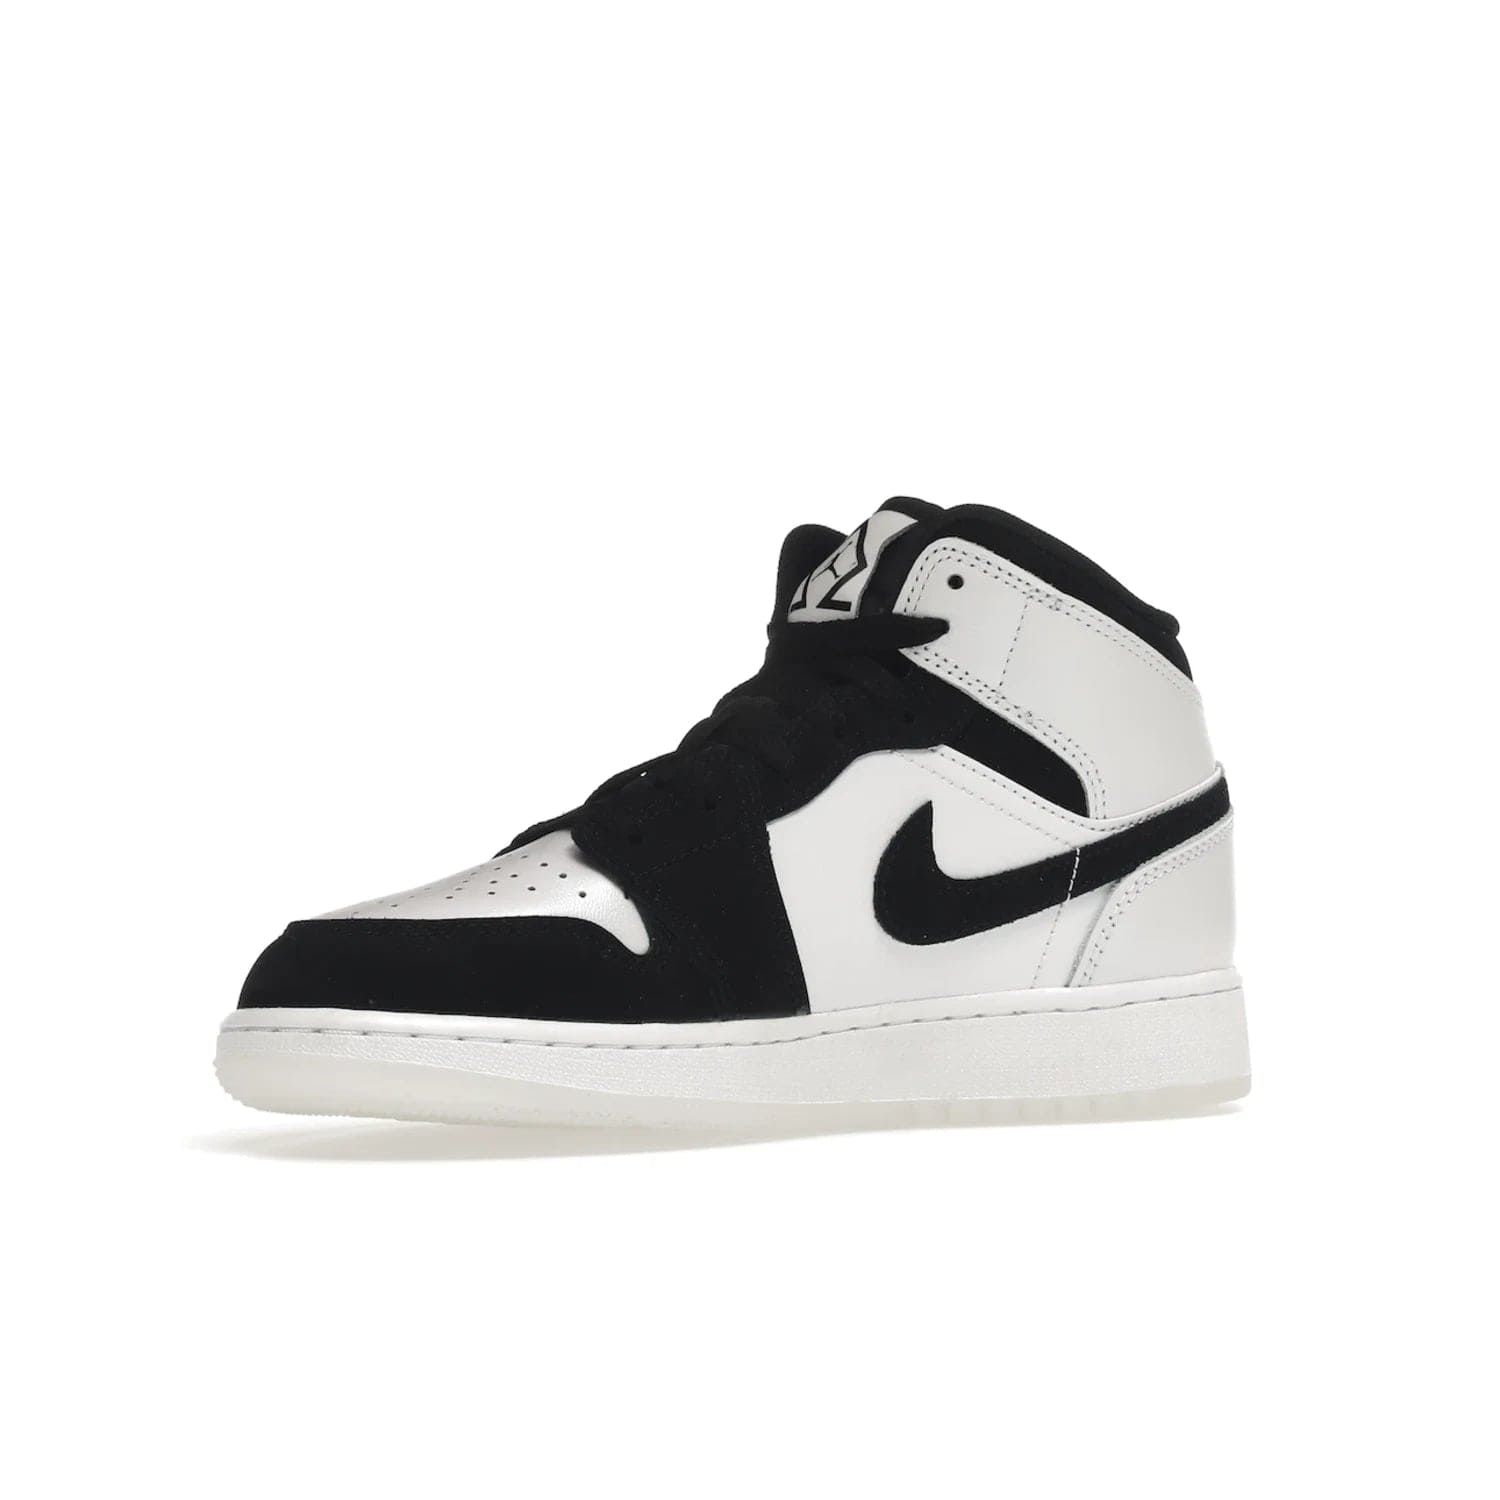 Jordan 1 Mid Diamond Shorts (GS) - Image 16 - Only at www.BallersClubKickz.com - Get the Jordan 1 Mid Diamond Shorts GS on 9th Feb 2022! Features a white, black & suede design with nylon tongue, stamped wings logo, rubber midsole & outsole. Only $100!